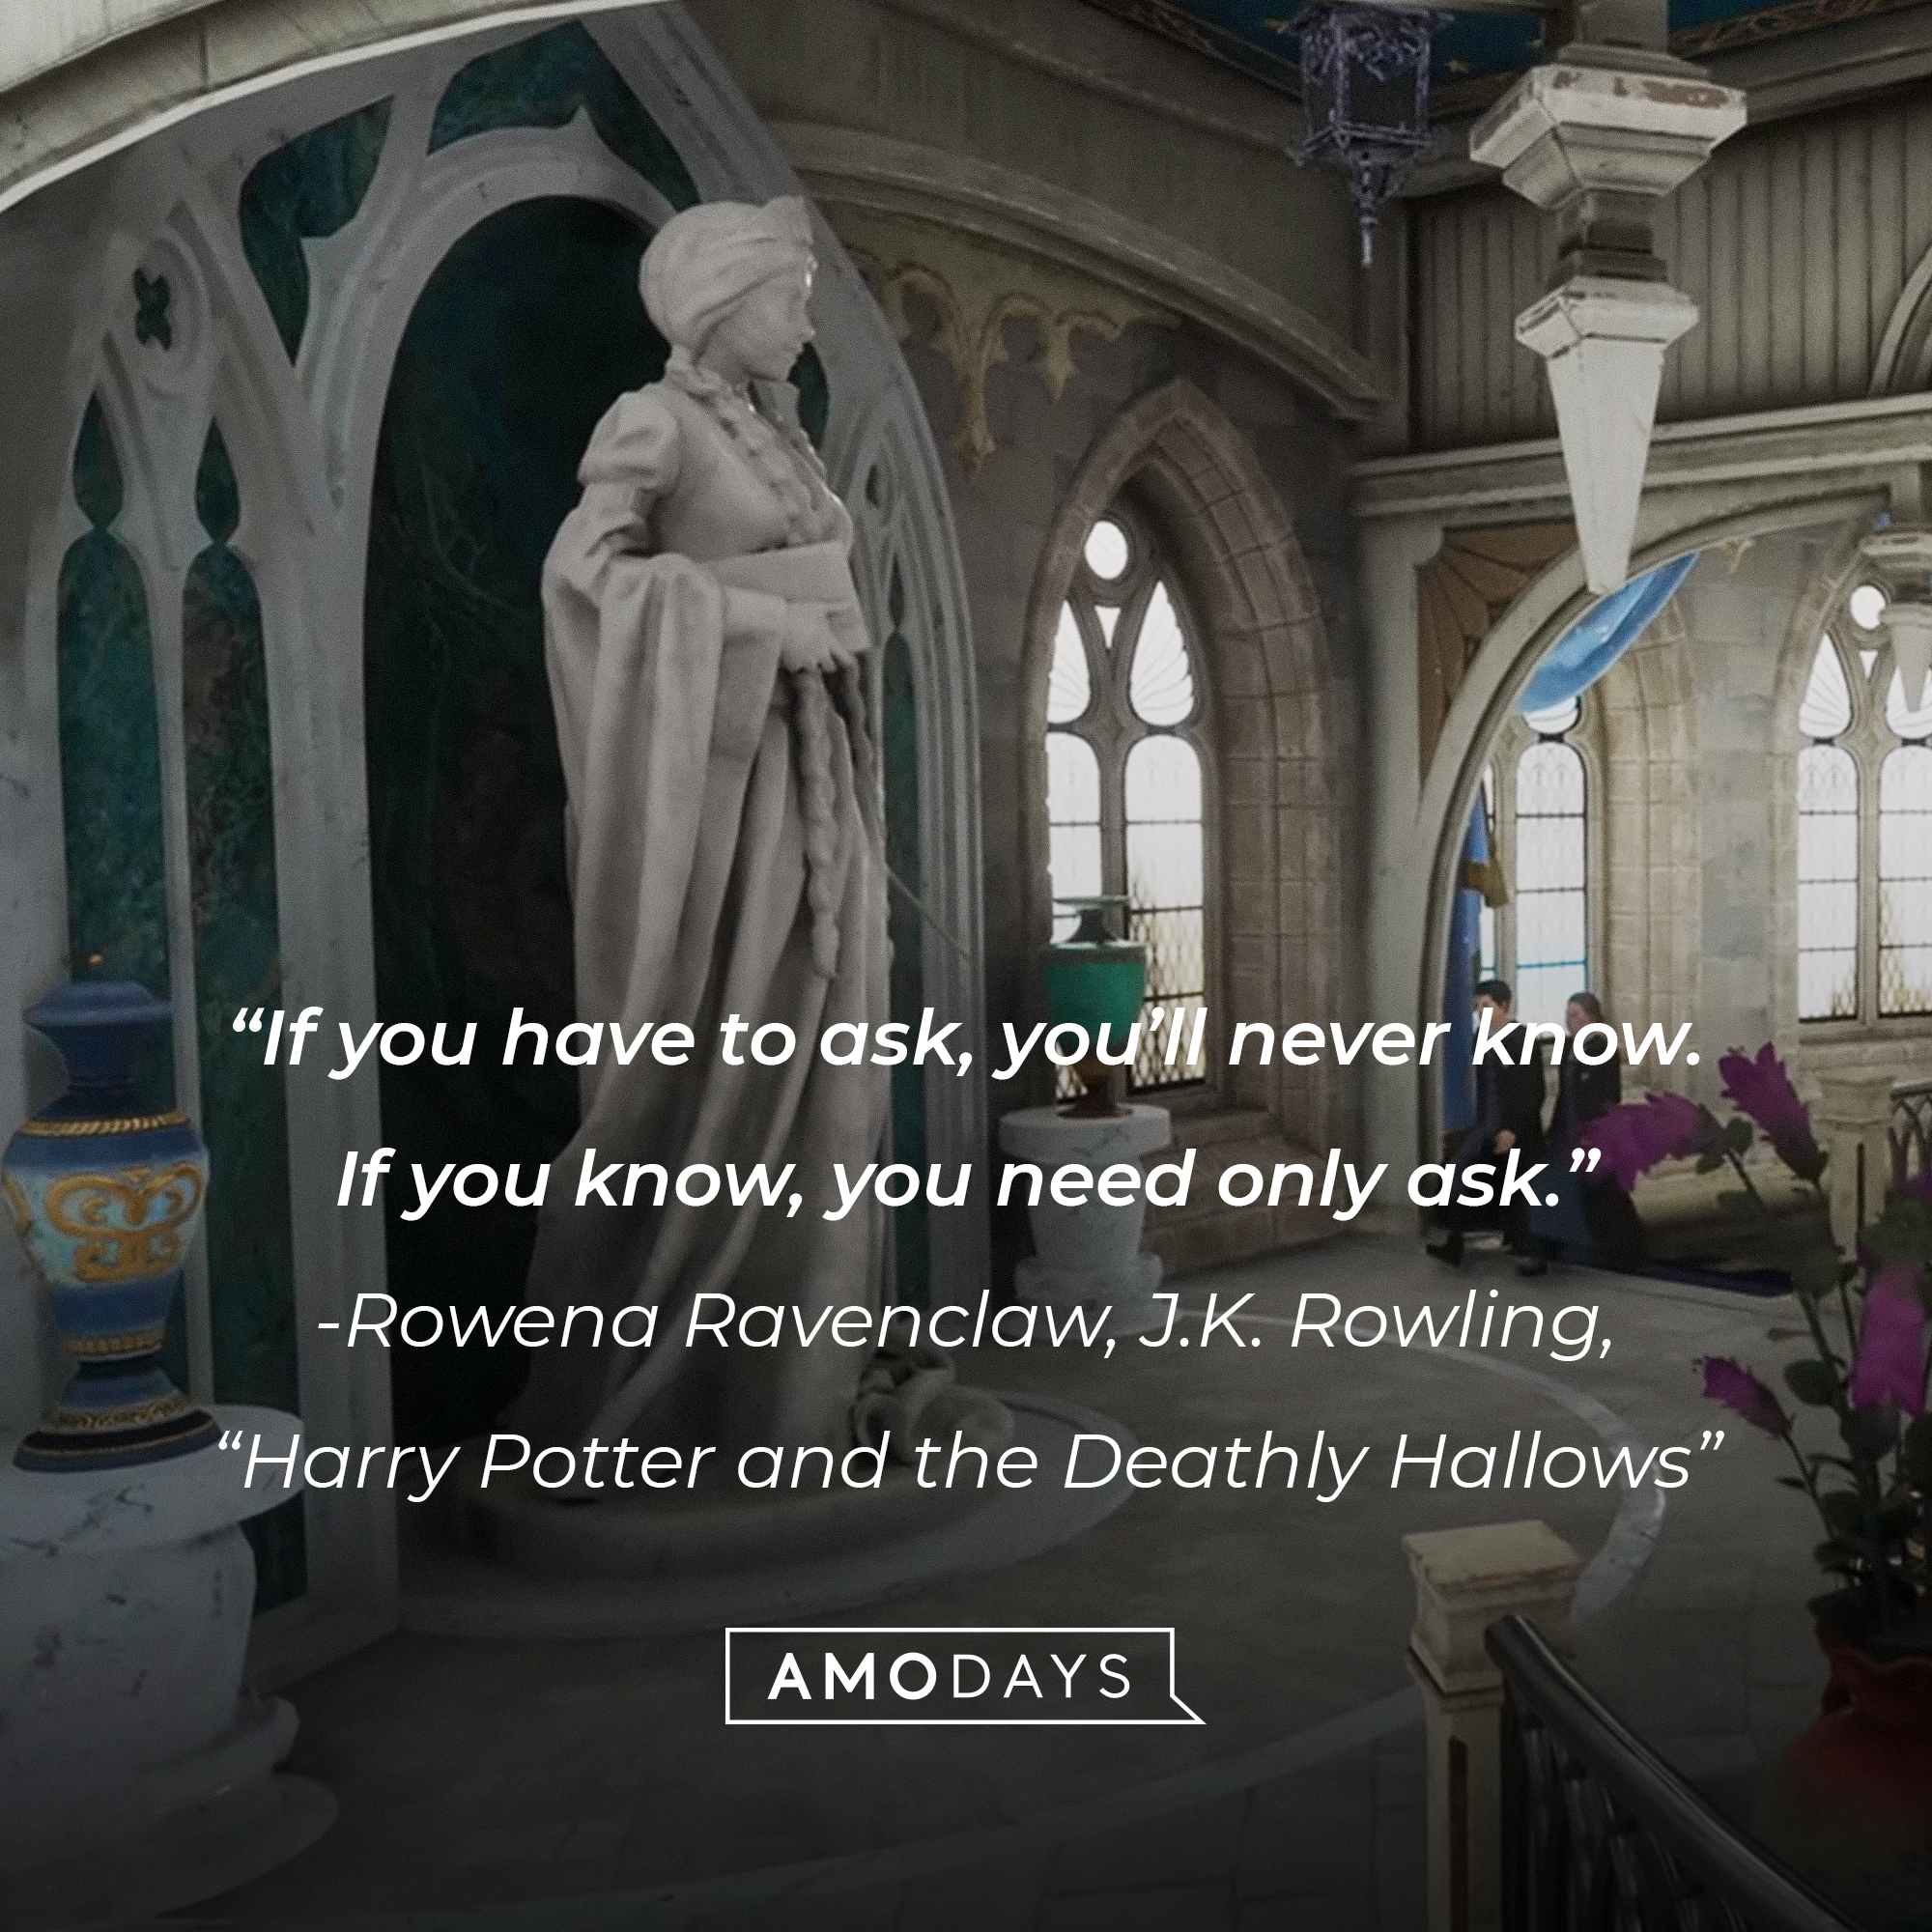 Rowena Ravenclaw’s quote from J.K. Rowling’s “Harry Potter and the Deathly Hallows” : “If you have to ask, you’ll never know. If you know, you need only ask.” | Source: youtube.com/HogwartsLegacy